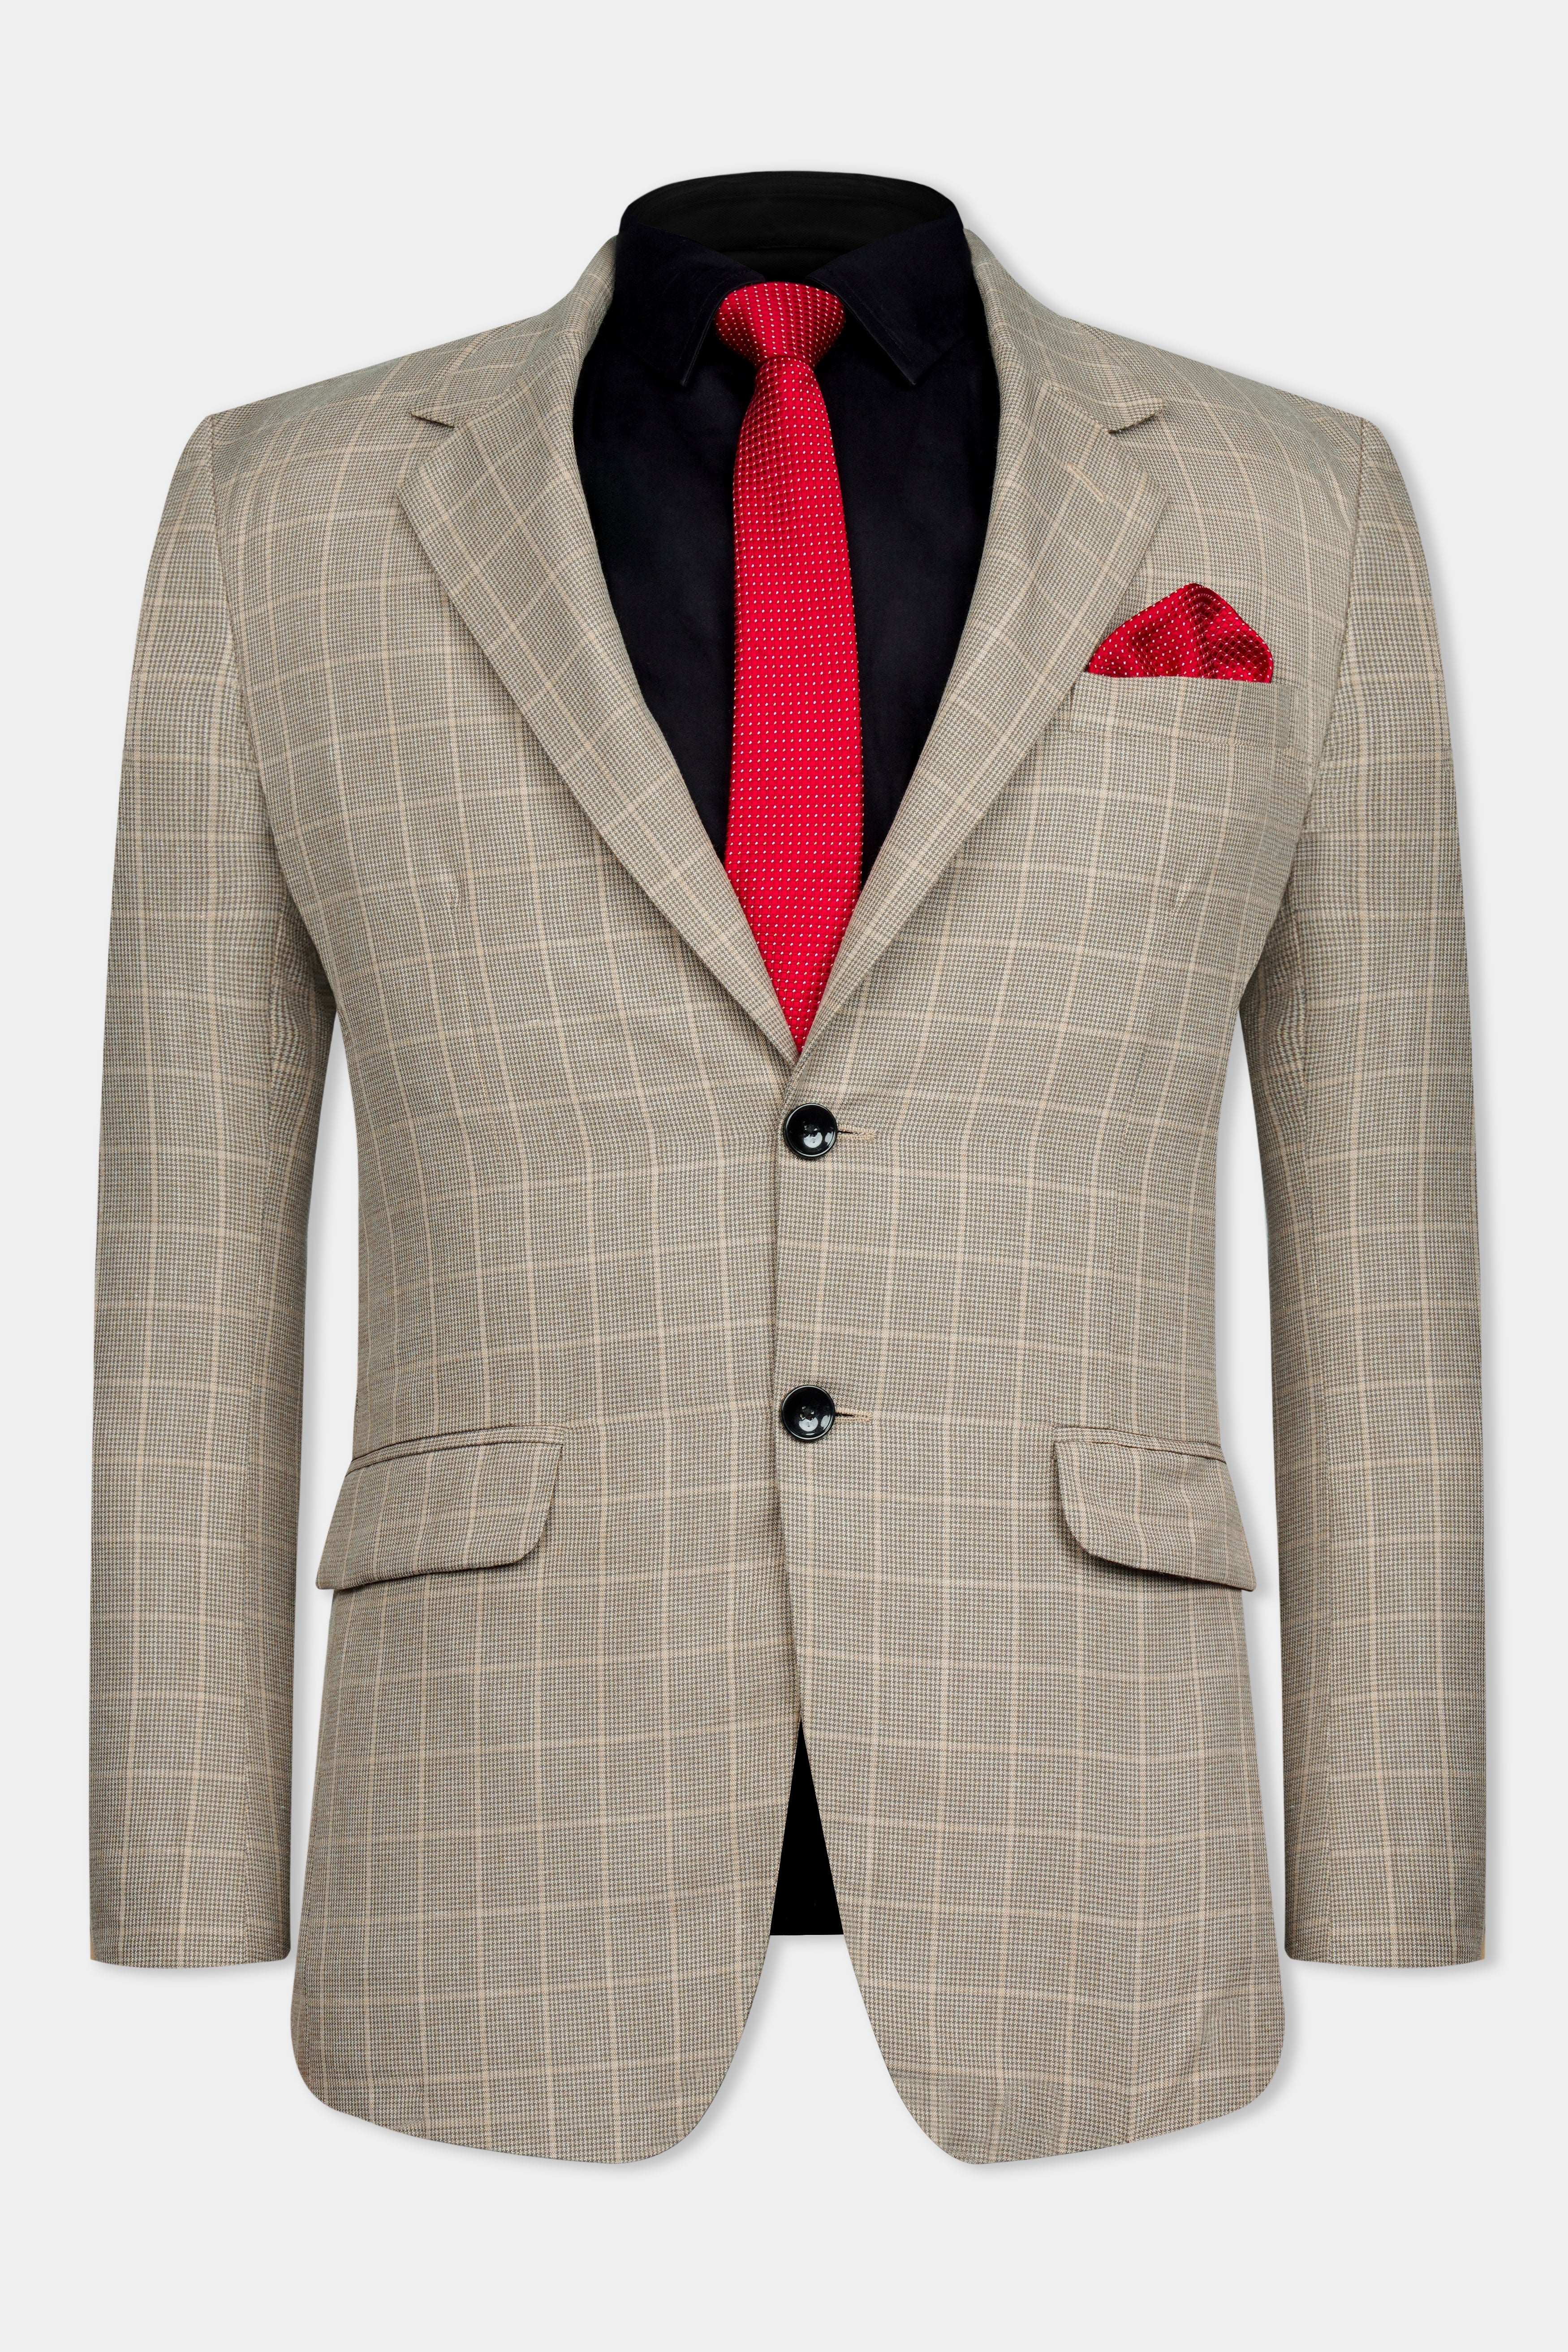 Apricot Brown Subtle Checkered Wool Rich Suit ST3008-SB-36, ST3008-SB-38, ST3008-SB-40, ST3008-SB-42, ST3008-SB-44, ST3008-SB-46, ST3008-SB-48, ST3008-SB-50, ST3008-SB-52, ST3008-SB-54, ST3008-SB-56, ST3008-SB-58, ST3008-SB-60